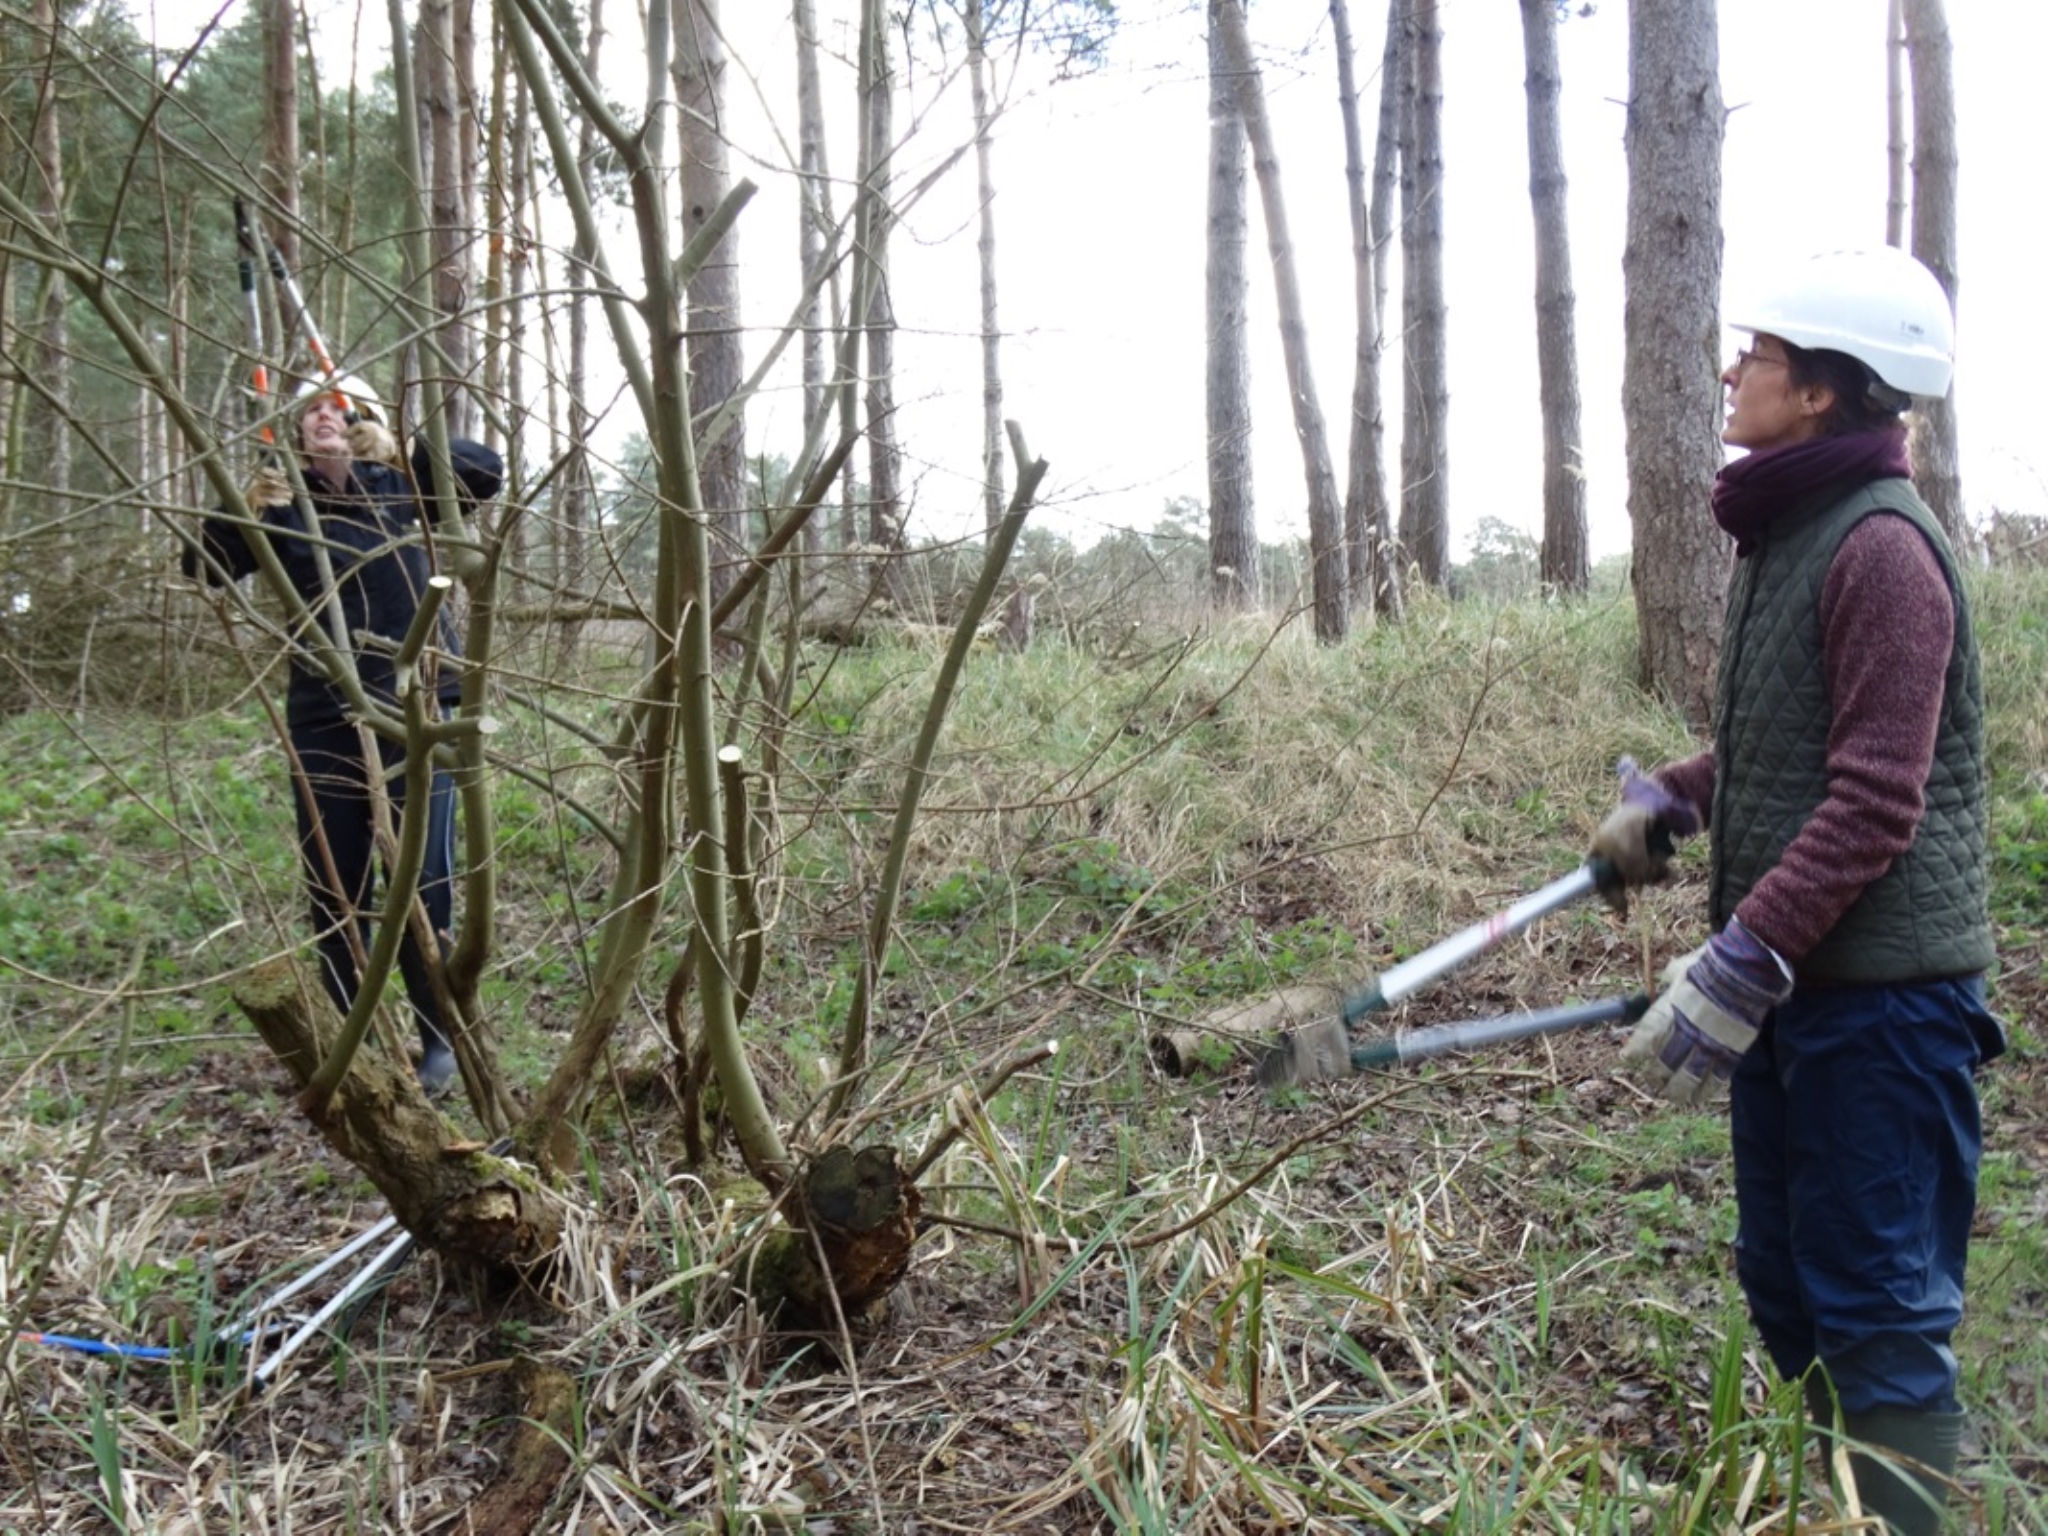 A photo from the FoTF Conservation Event - March 2019 - Clearance work around, and in, the ponds at Harling Woods, Harling : Volunteers tackle a small tree